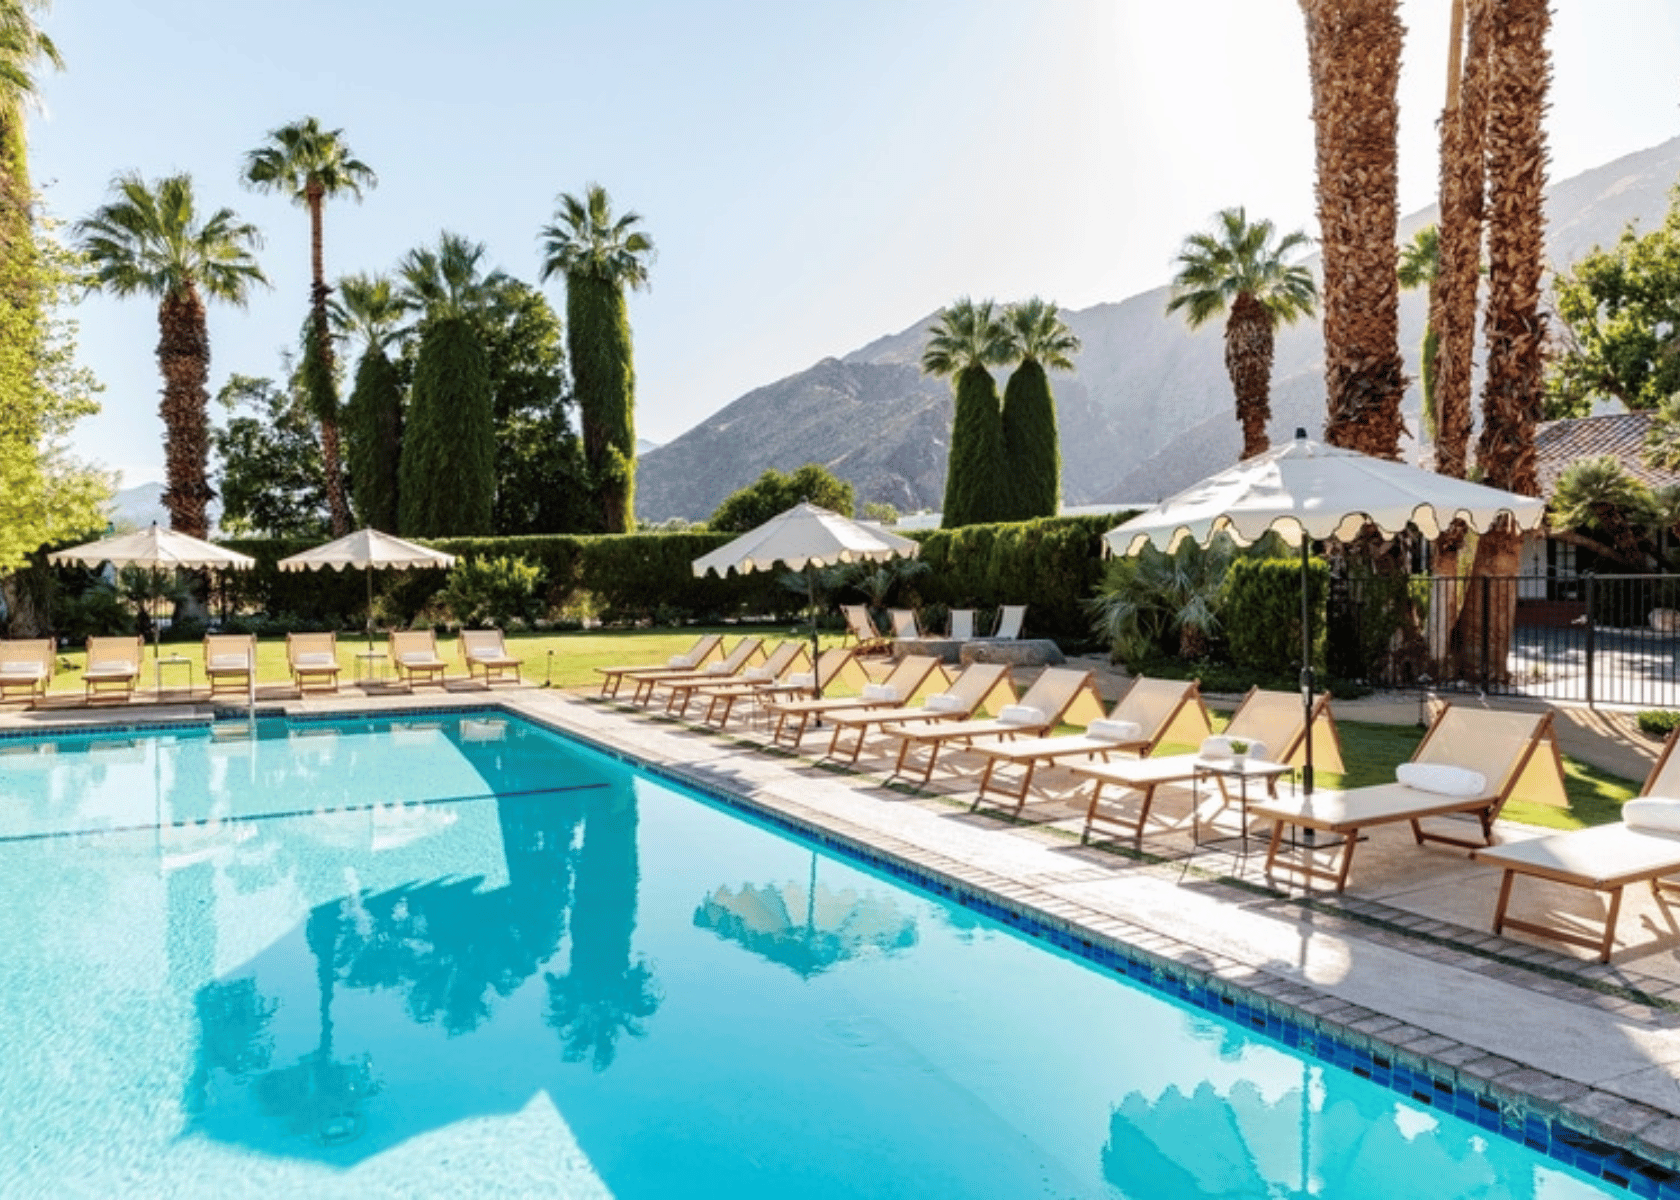 The Best Hotels in Palm Springs - Explore the Desert Oasis!